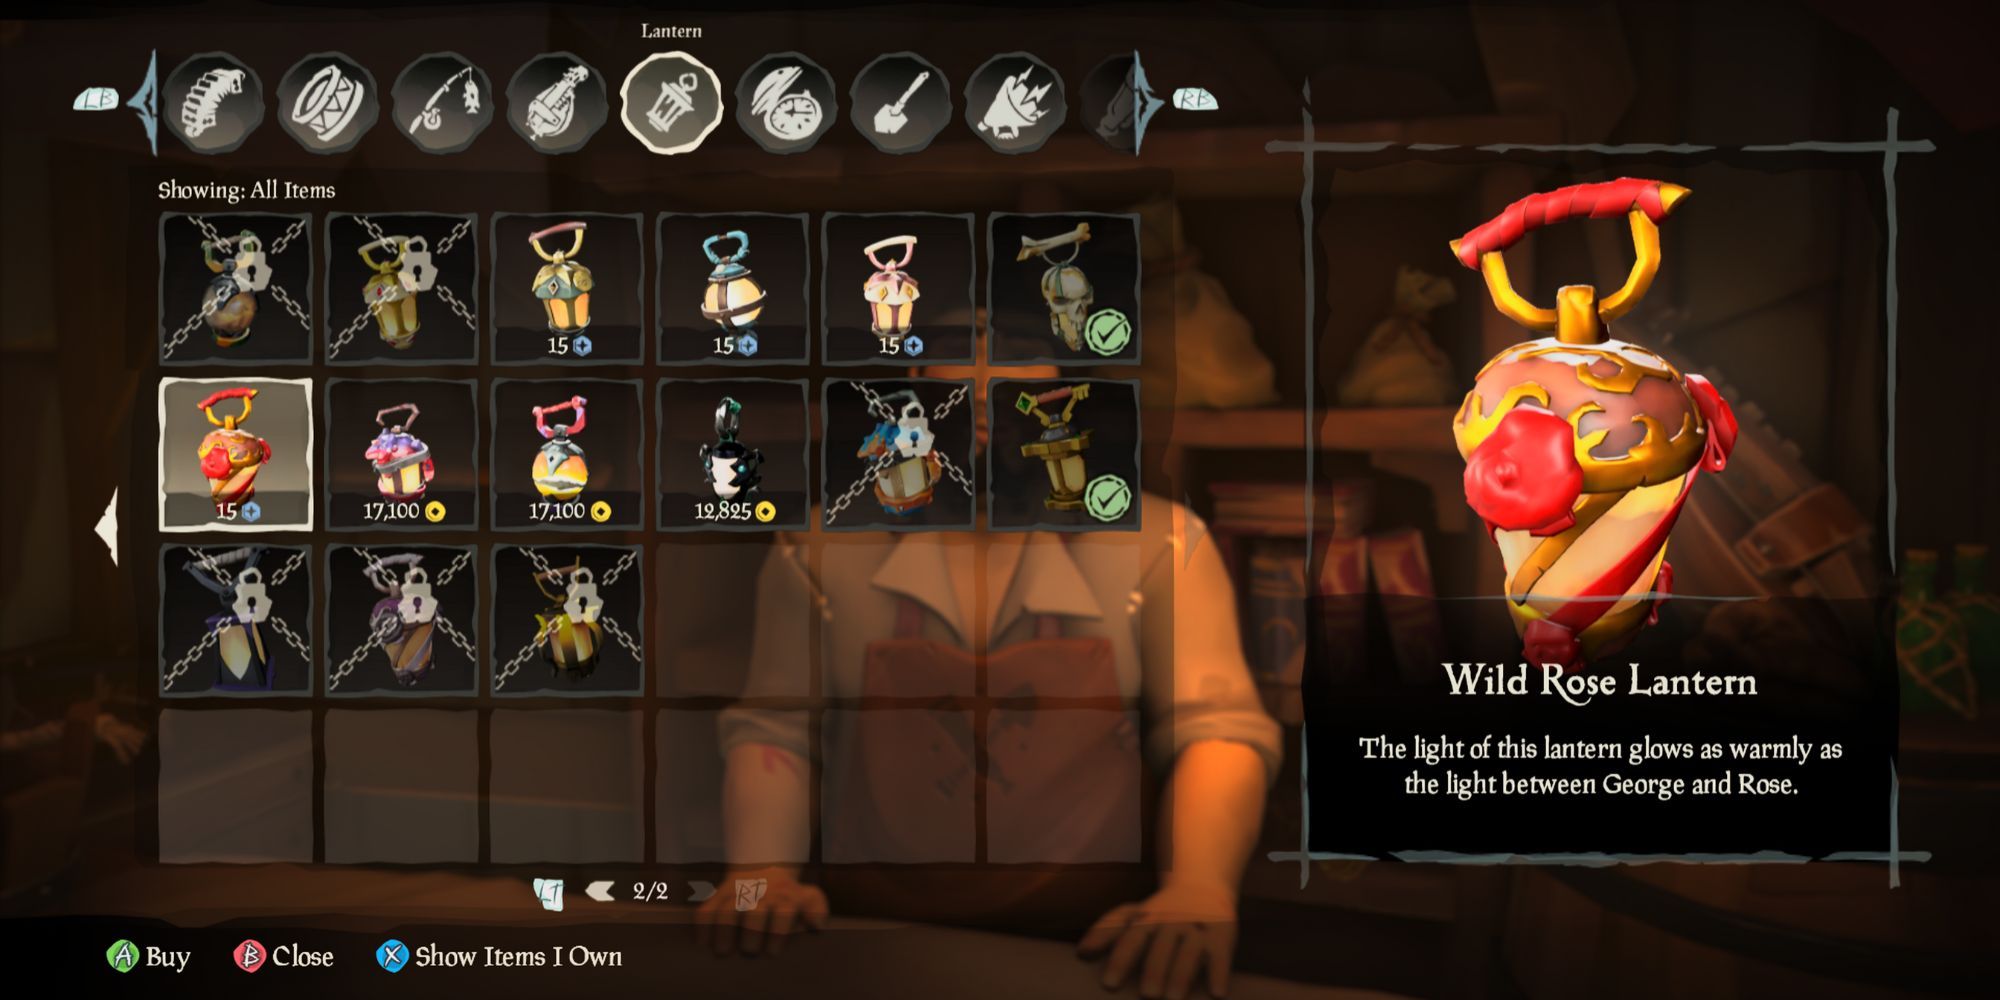 The Wild Rose Lantern in the equipment shop in Sea of Thieves